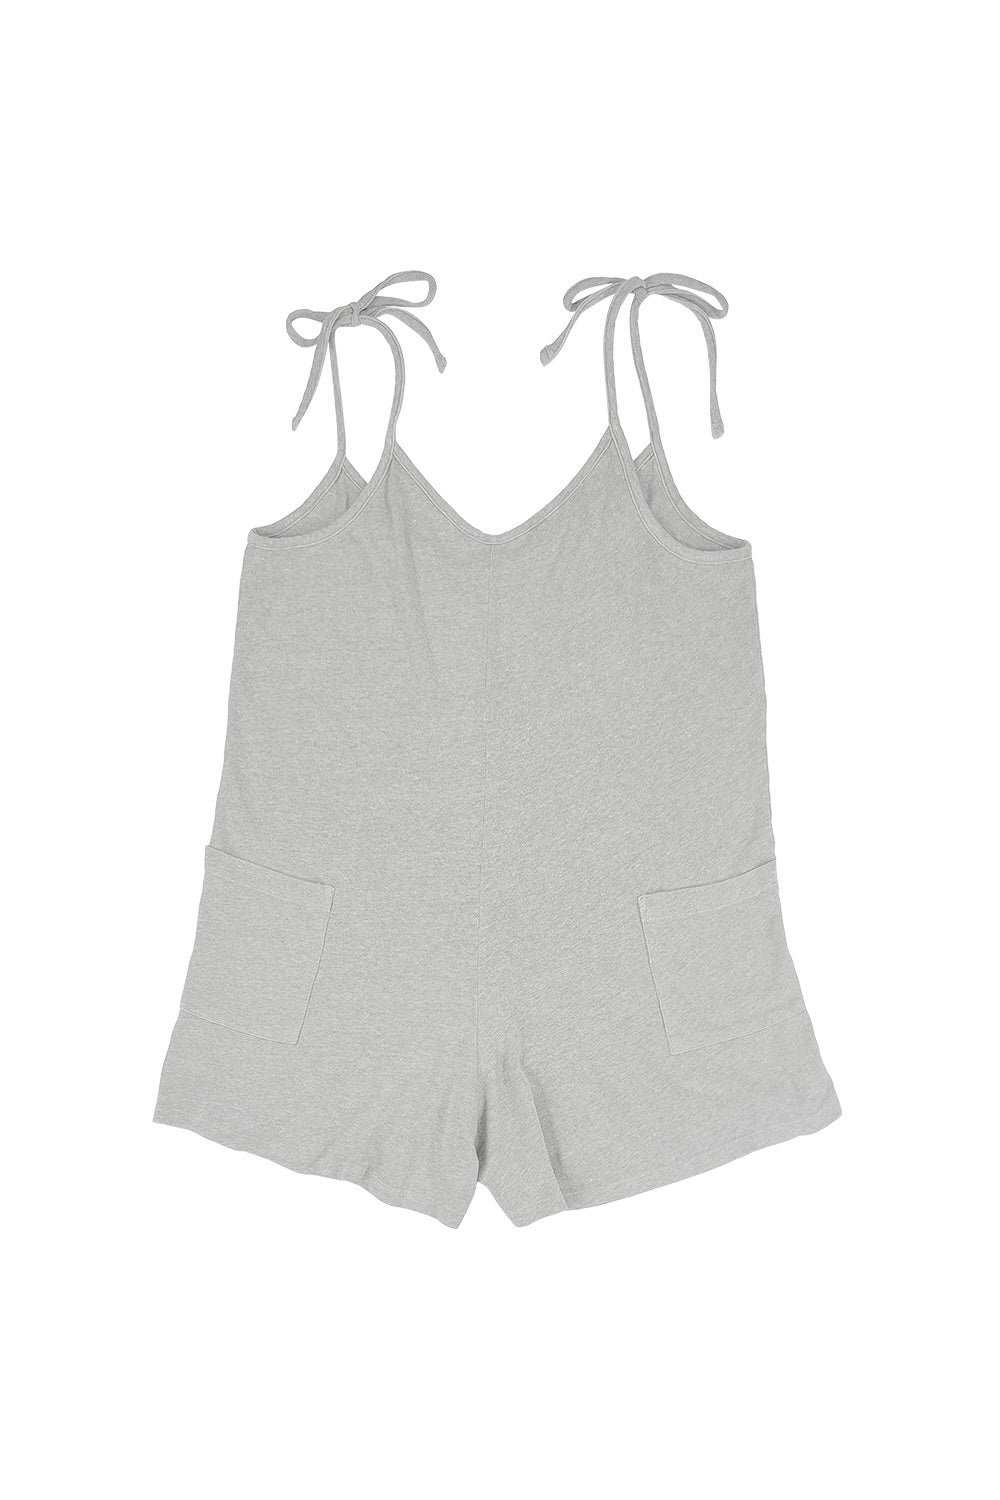 Heathered Sespe Short | Jungmaven Hemp Clothing & Accessories / Color: Athletic Gray